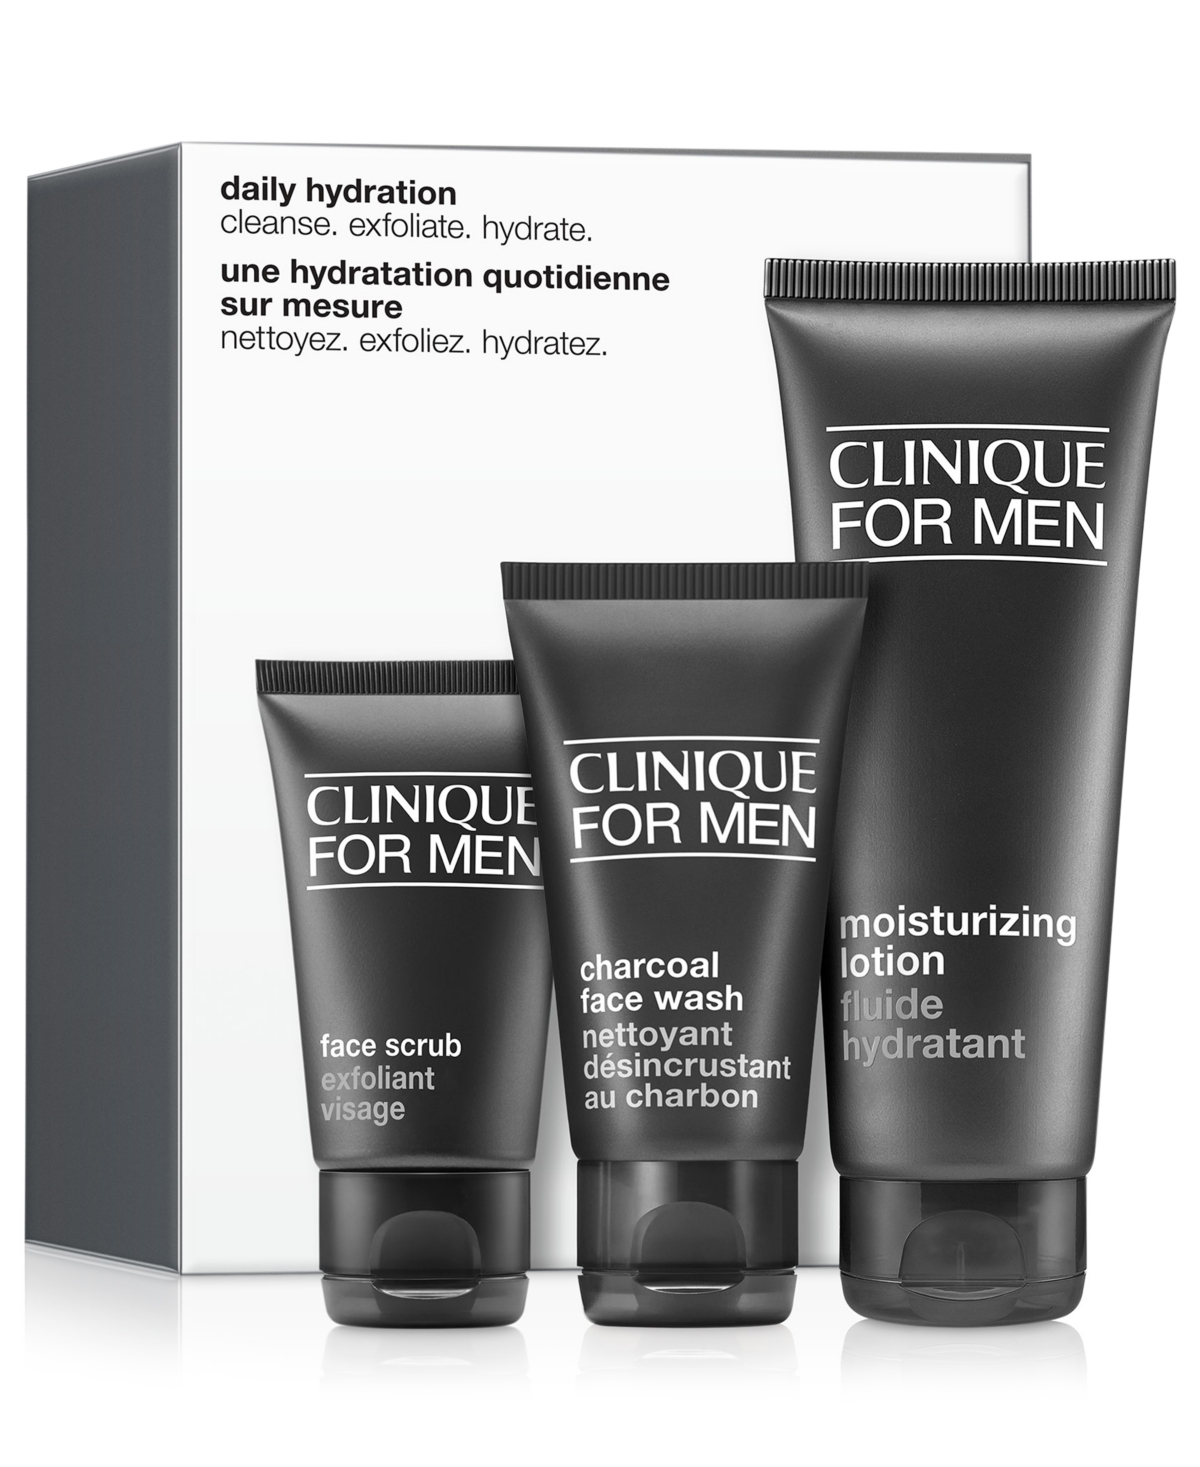 Clinique 3-pc. Daily Hydration Skincare Set For Men